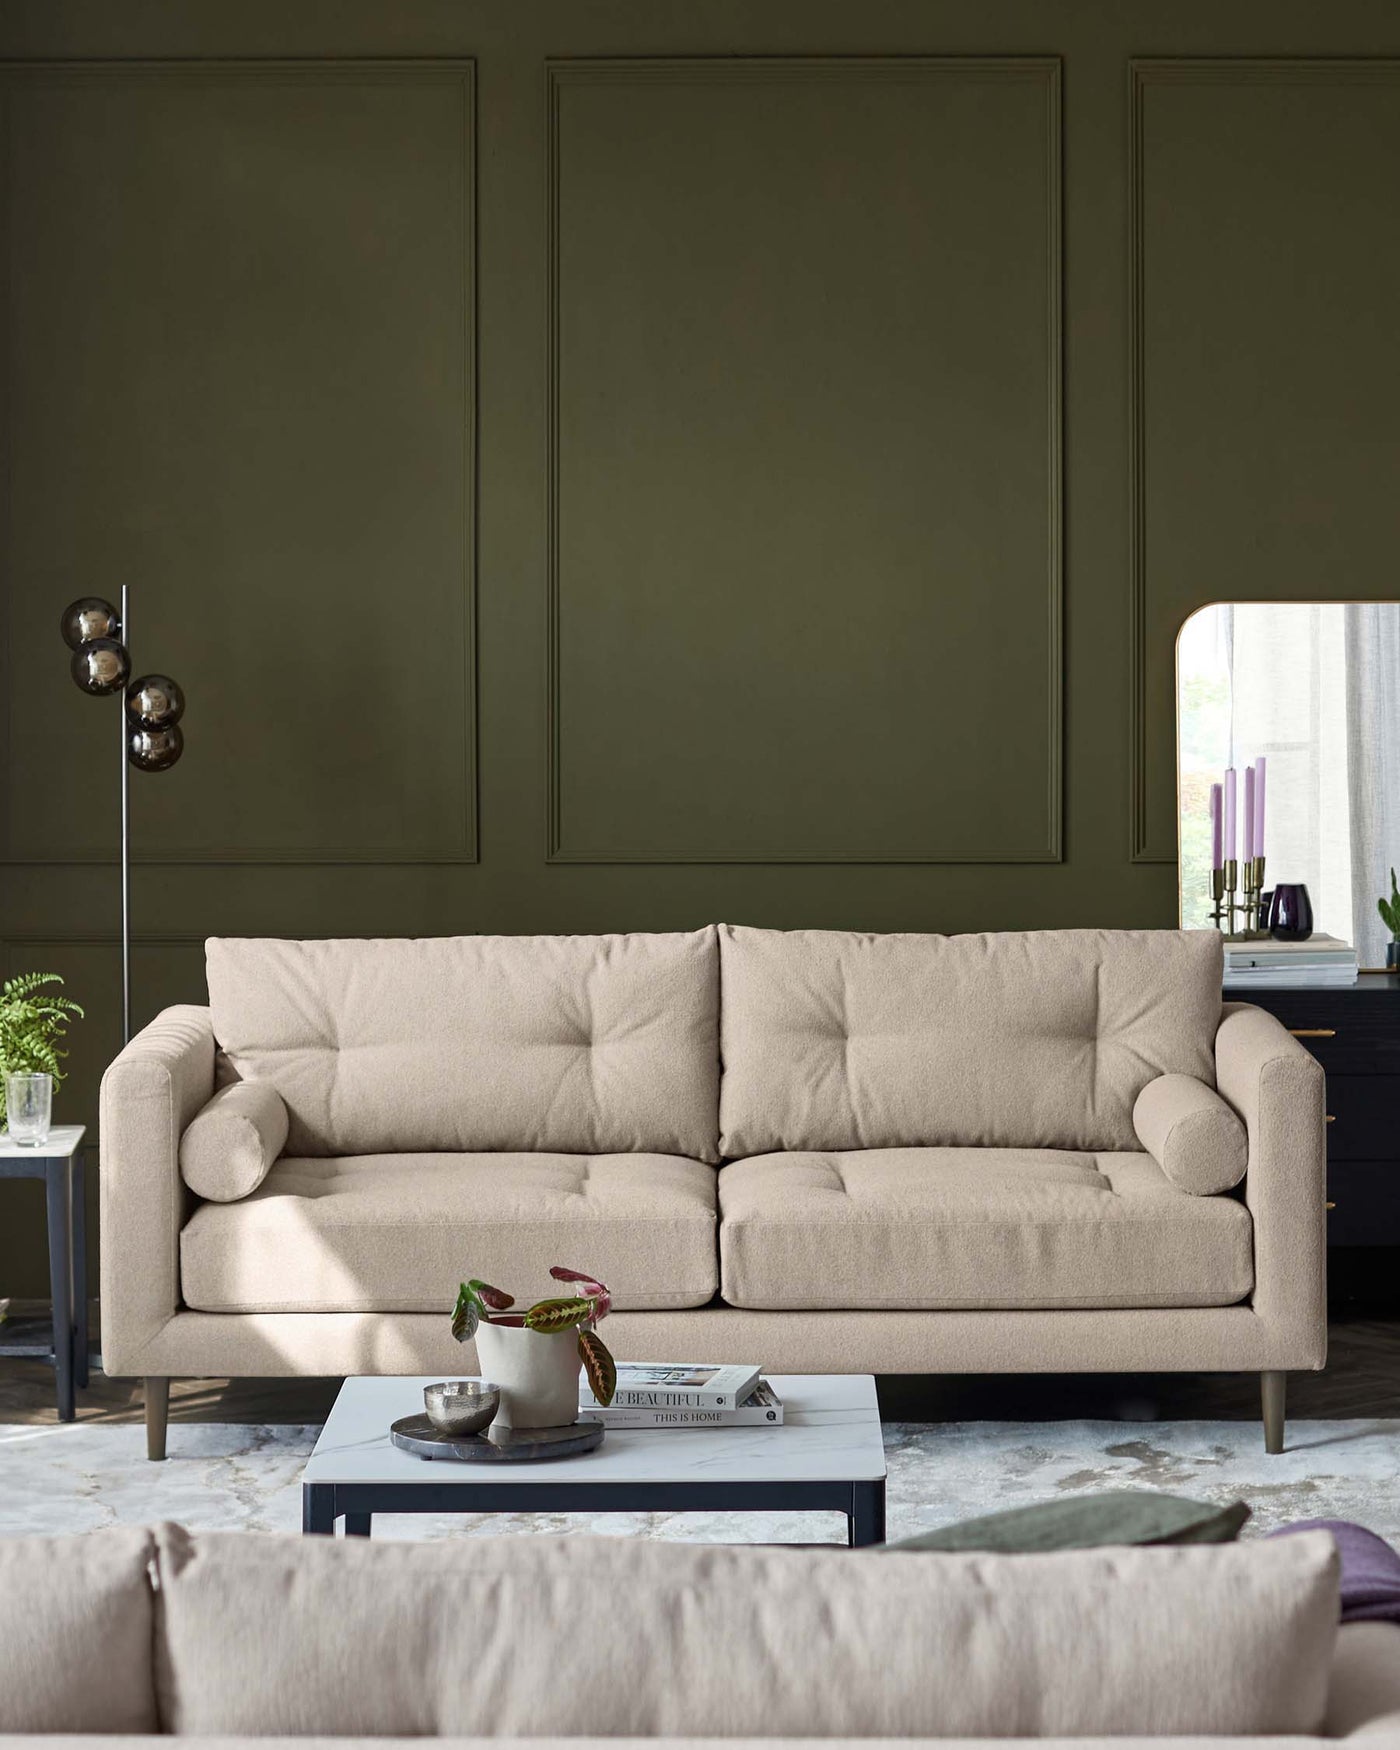 Modern beige three-seater sofa with plush cushions and cylindrical armrests, set in front of an olive green wall, with a low-profile grey coffee table in front, adorned with a plant and decorative items. An off-screen rug is partially visible in the foreground, and a metal floor lamp with round shades stands to the side.